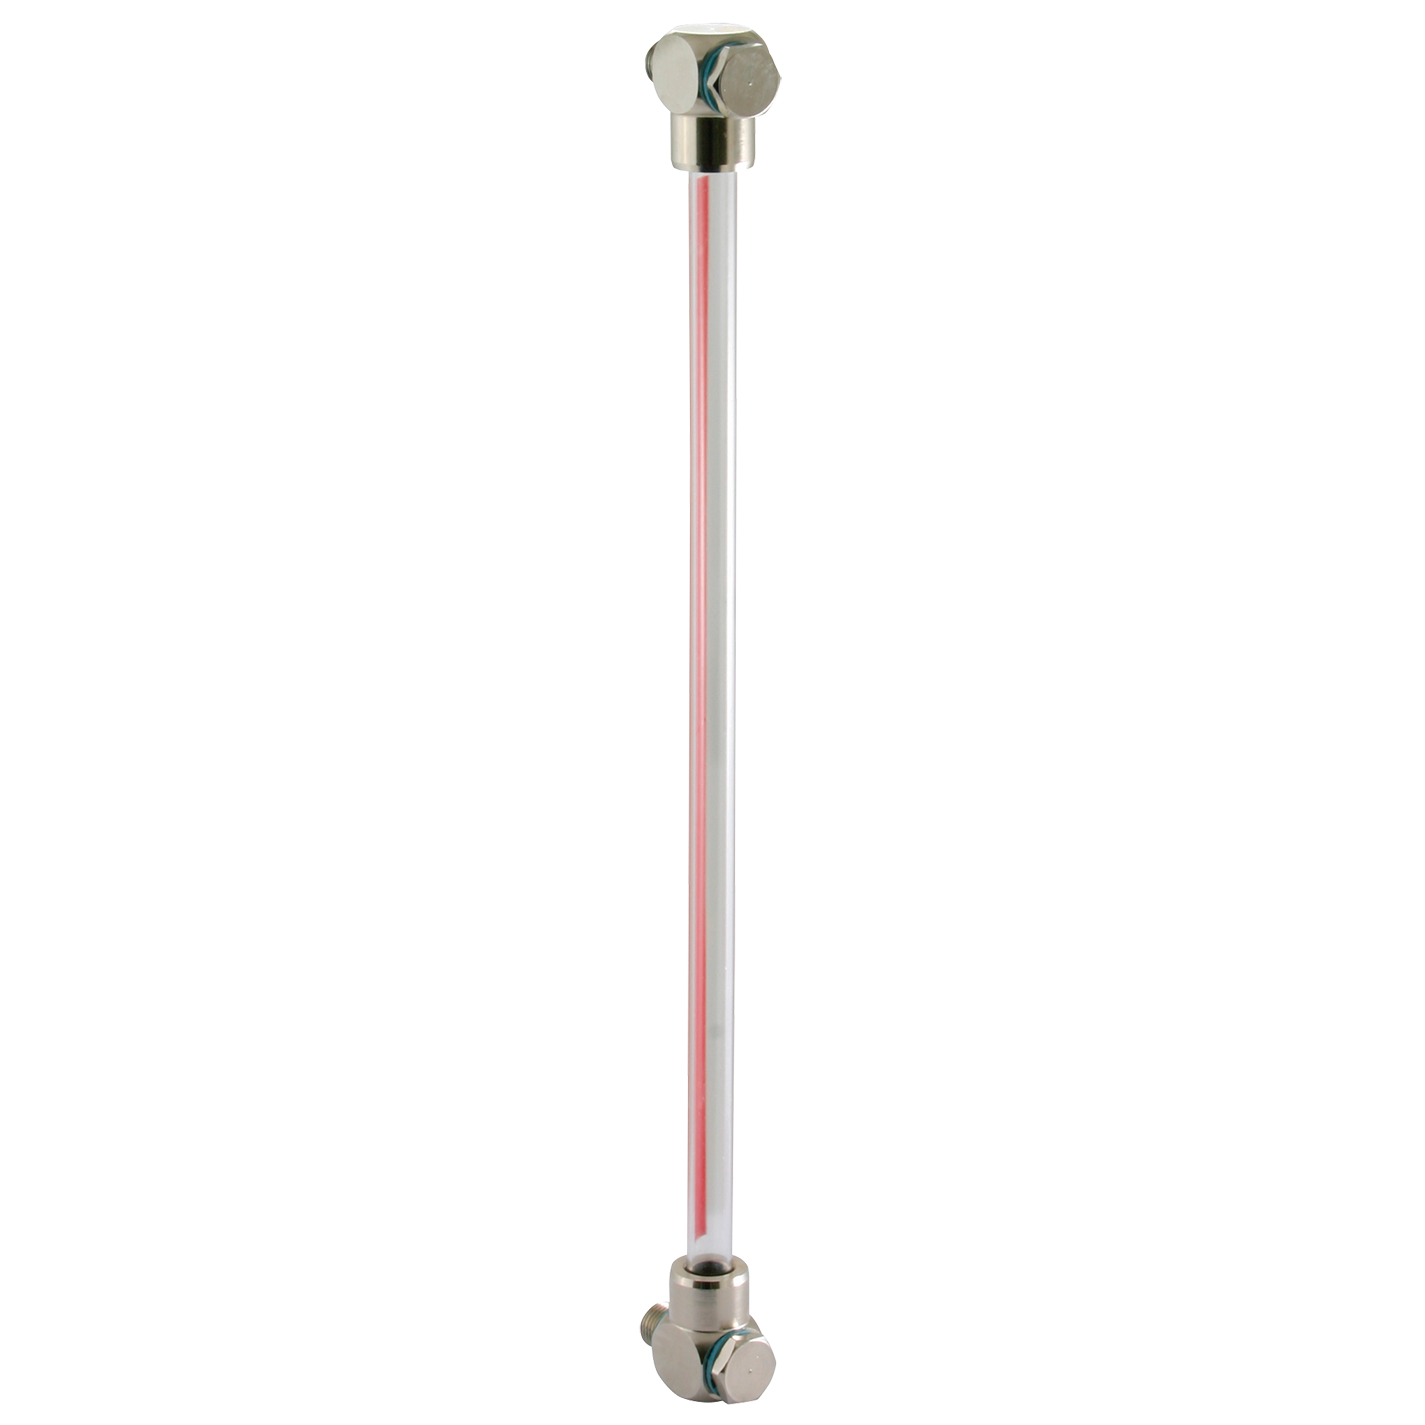 1/4" BSP Fluid Level Gauge W/O Thermometer Centres 450mm